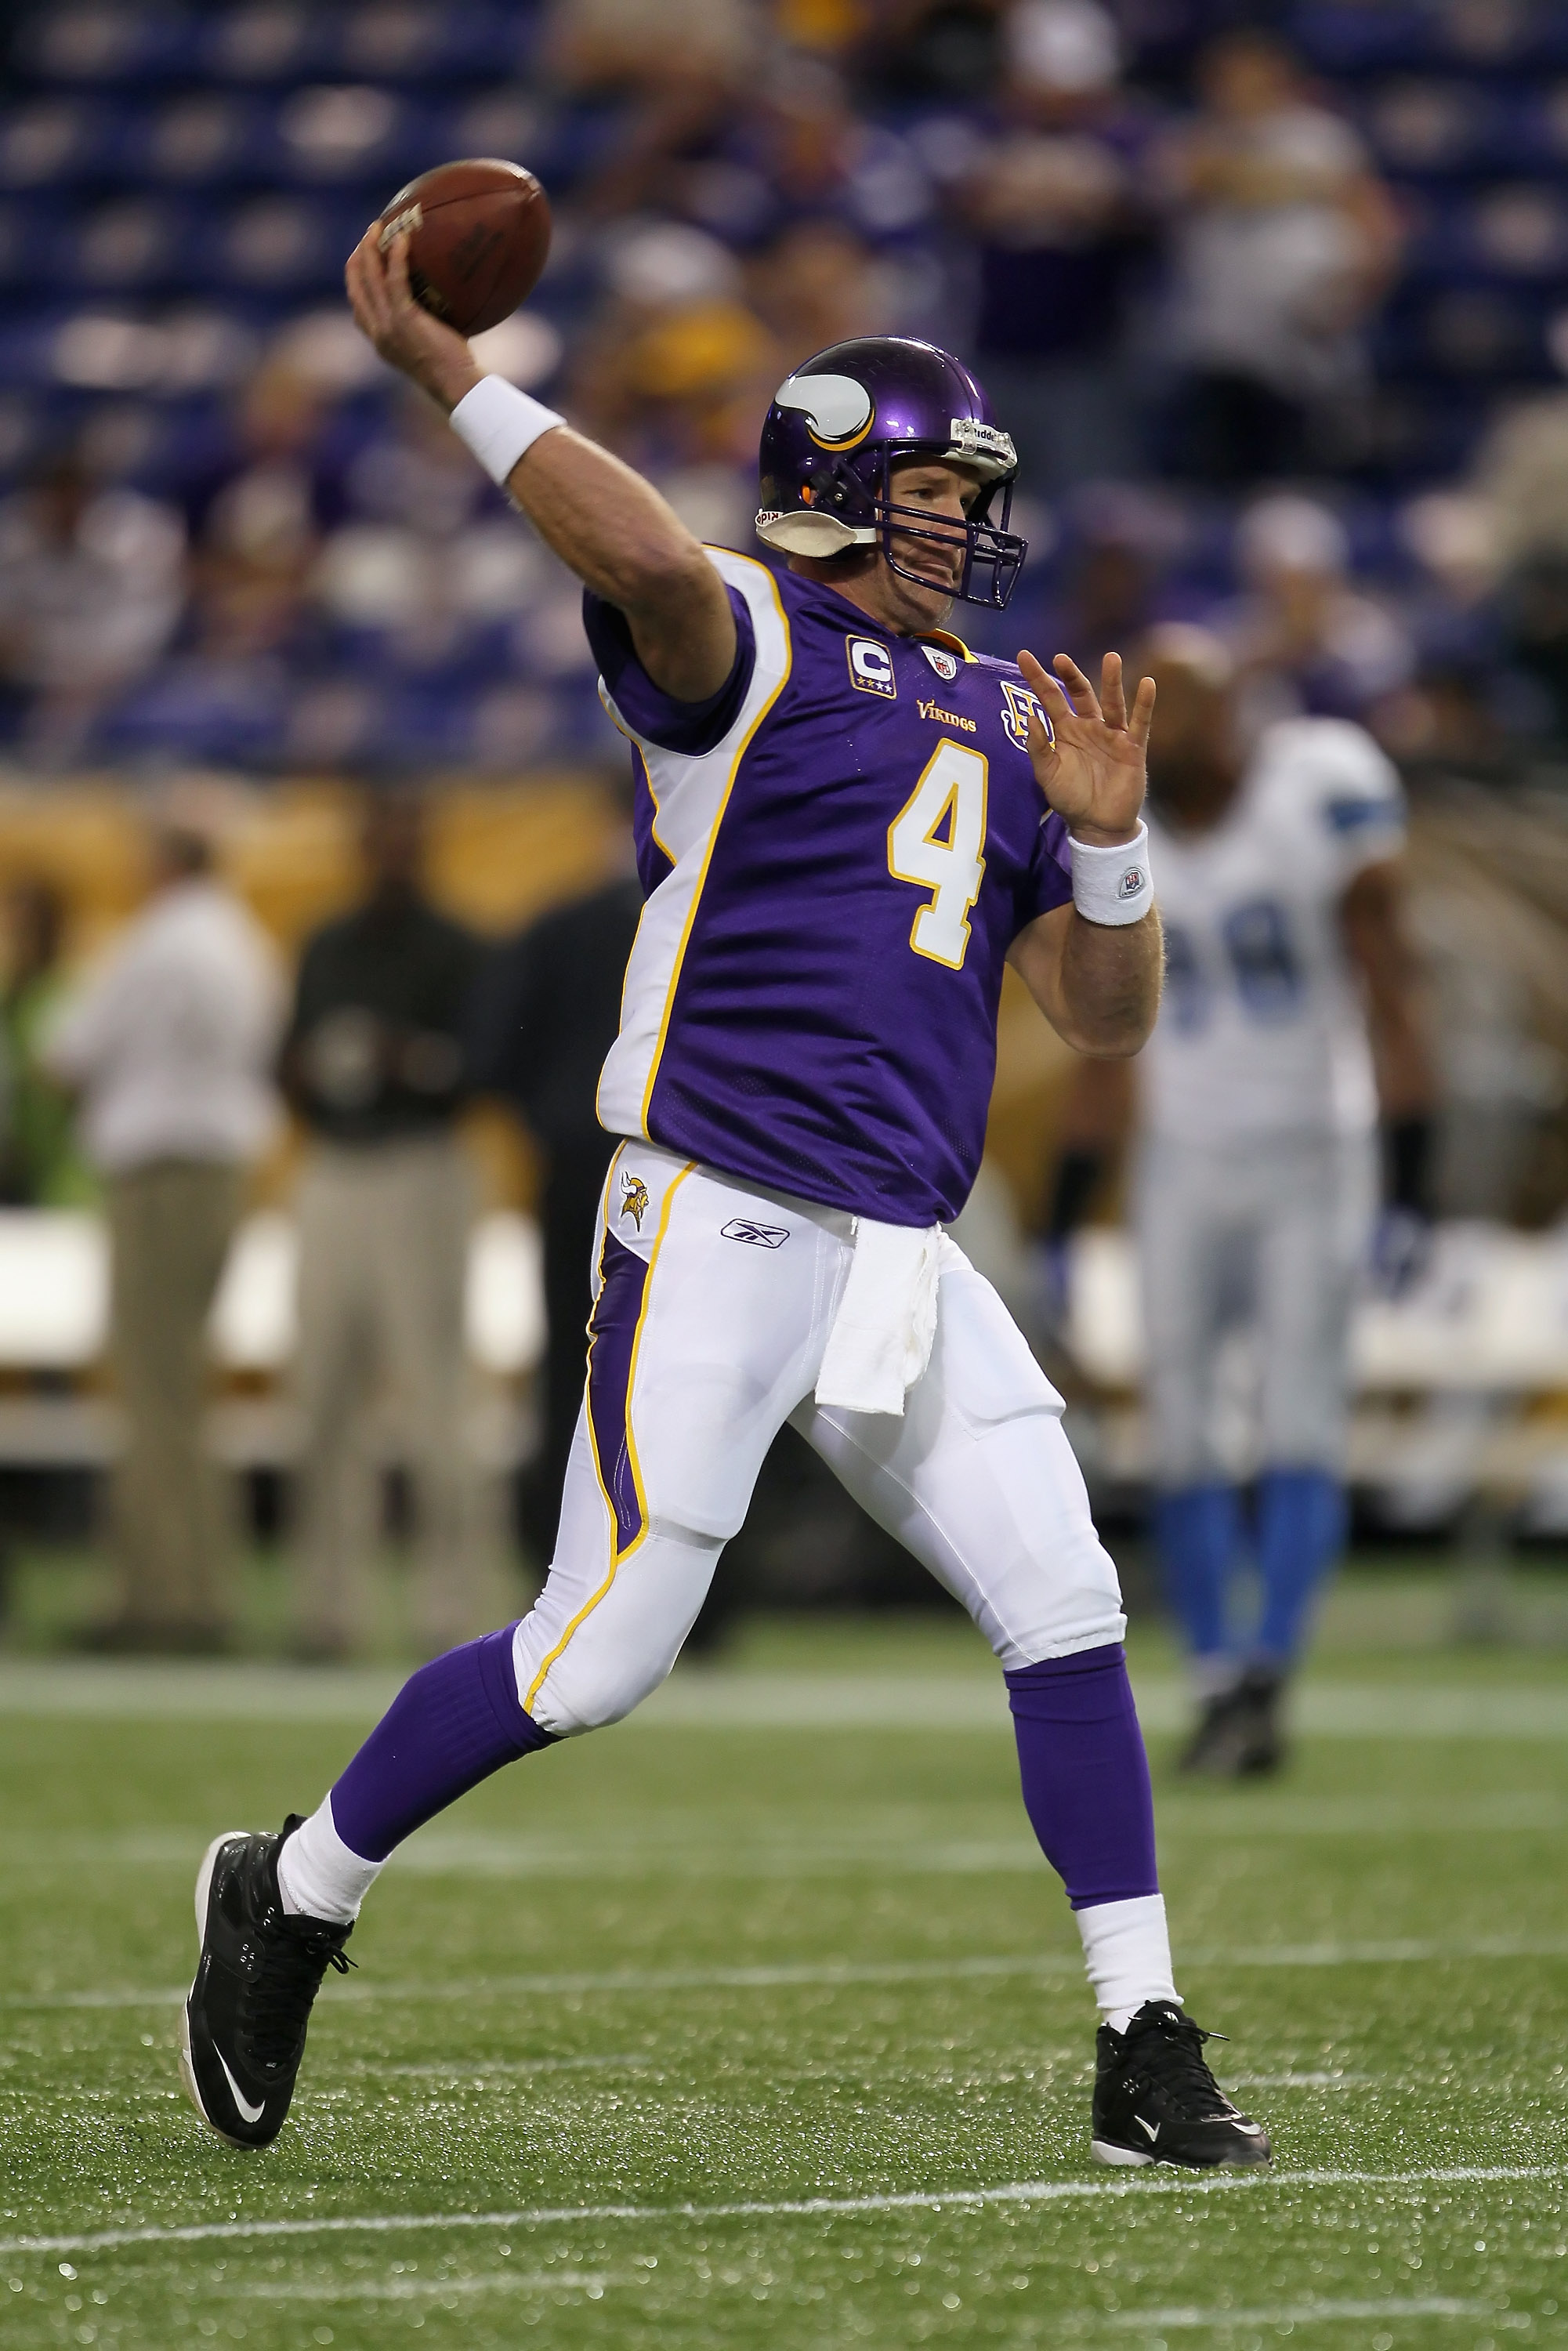 MINNEAPOLIS - SEPTEMBER 26:  Quarterback Brett Favre #4 of the Minnesota Vikings drops back to pass prior to the start of the game against the Detroit Lions at Mall of America Field on September 26, 2010 in Minneapolis, Minnesota.  (Photo by Jeff Gross/Ge